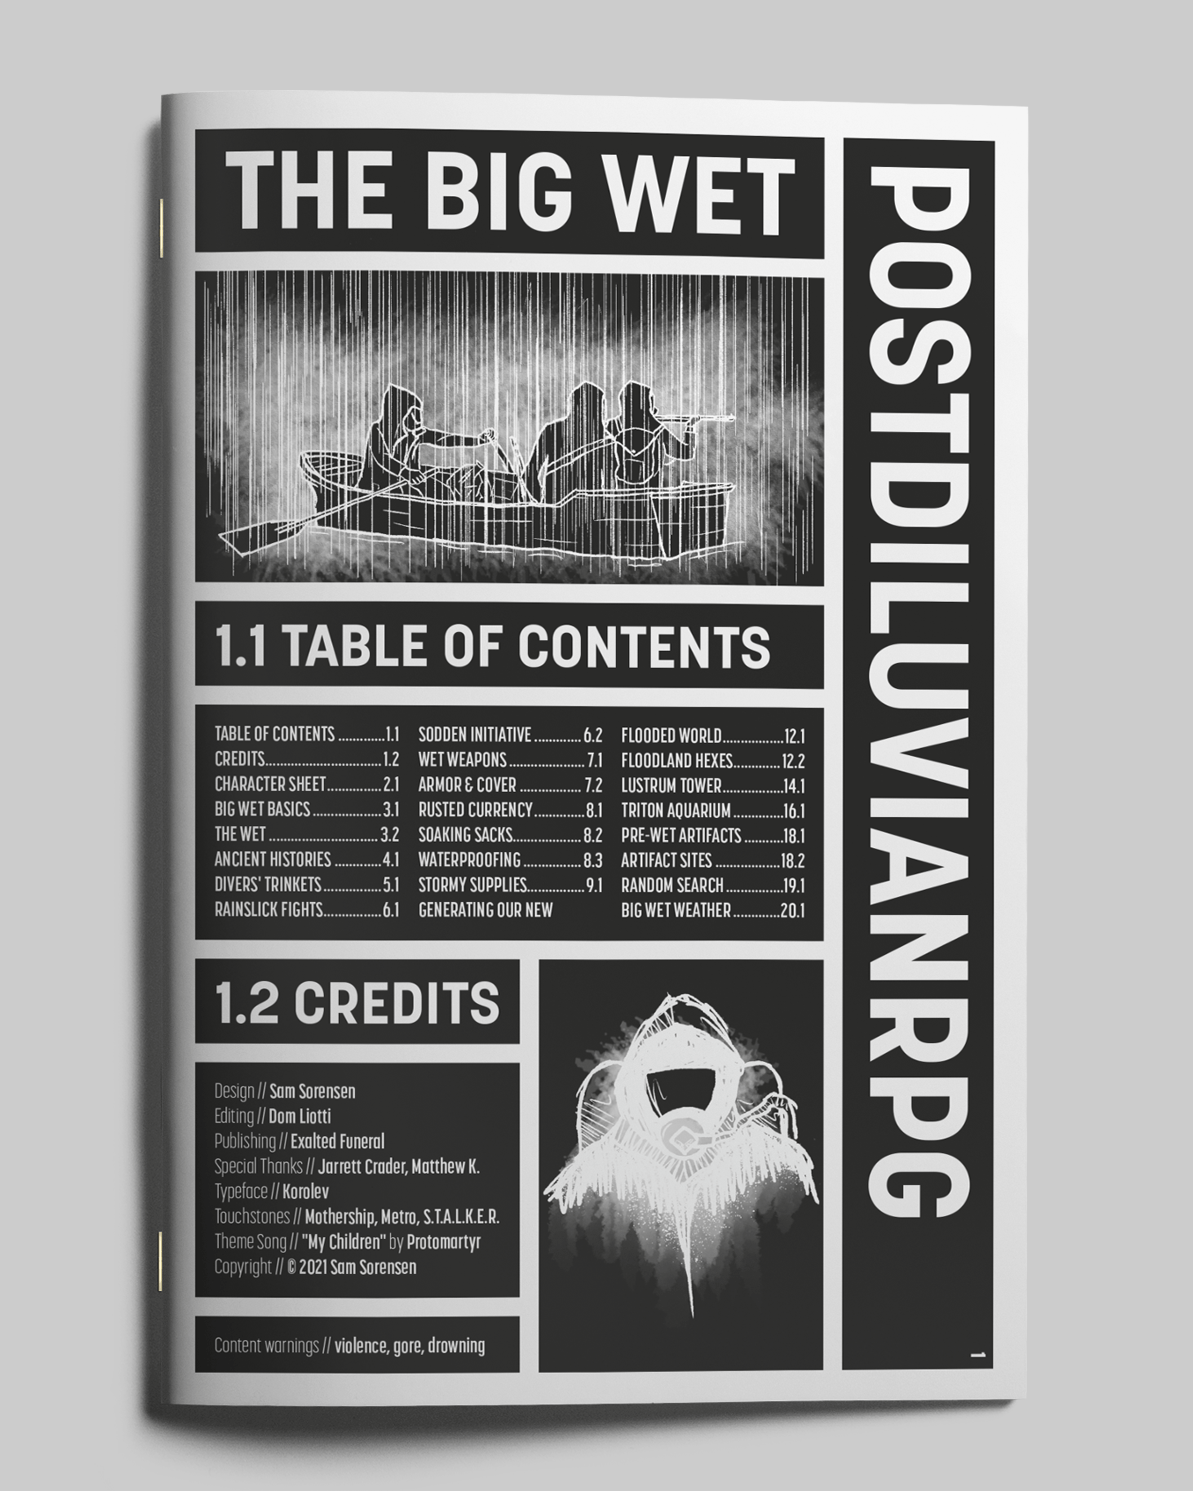 The Big Wet - Exalted Funeral